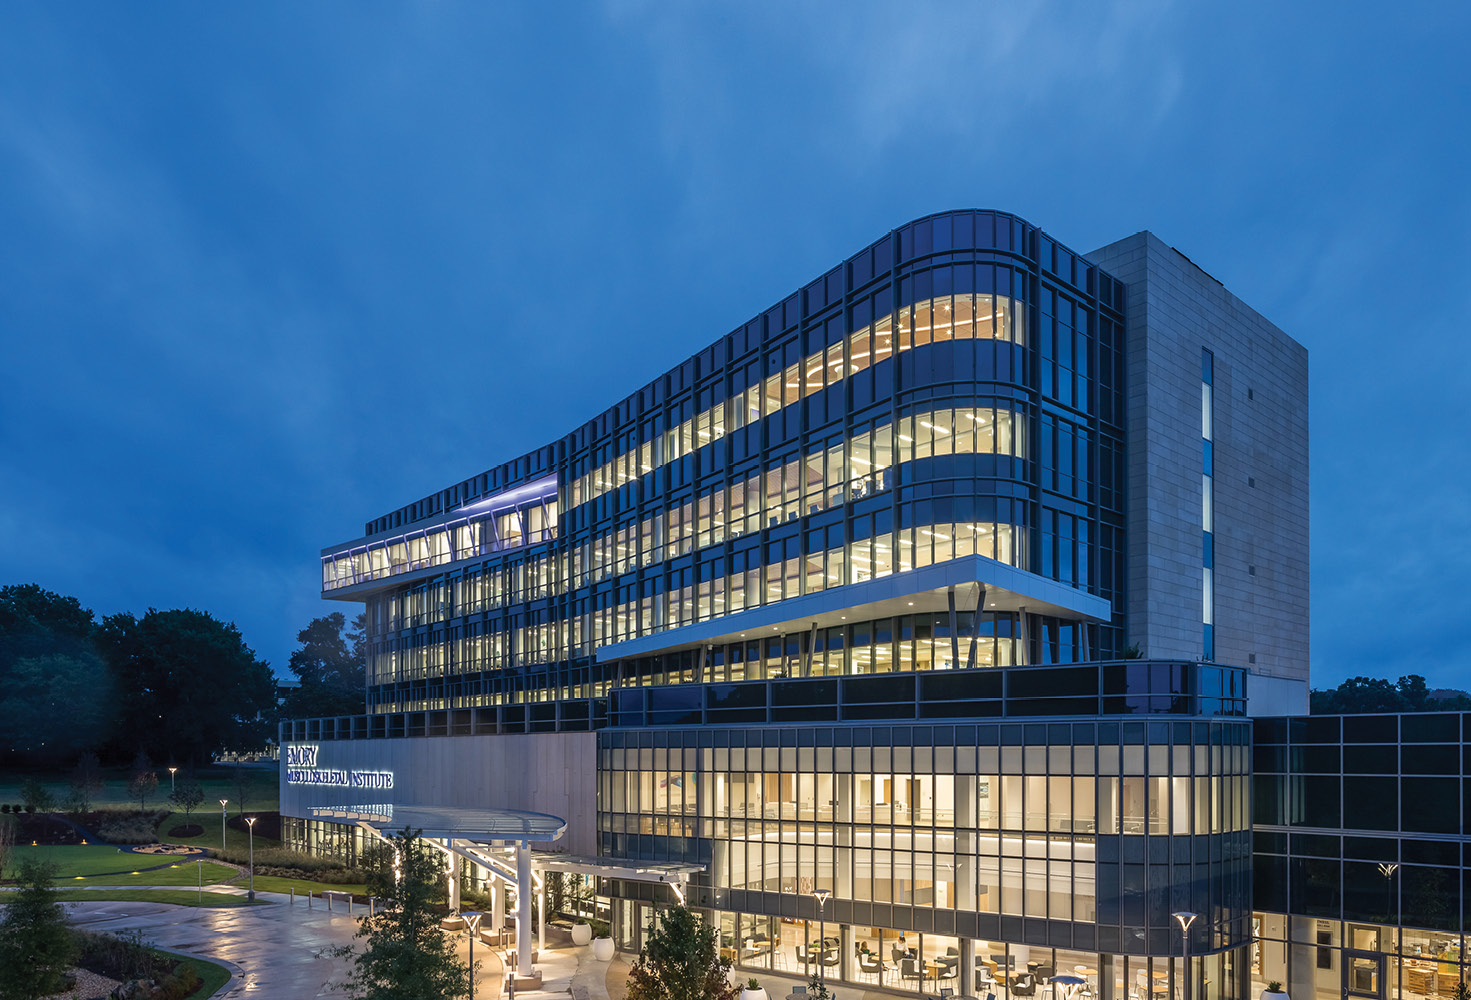 The Emory Musculoskeletal Institute in Brookhaven, Georgia